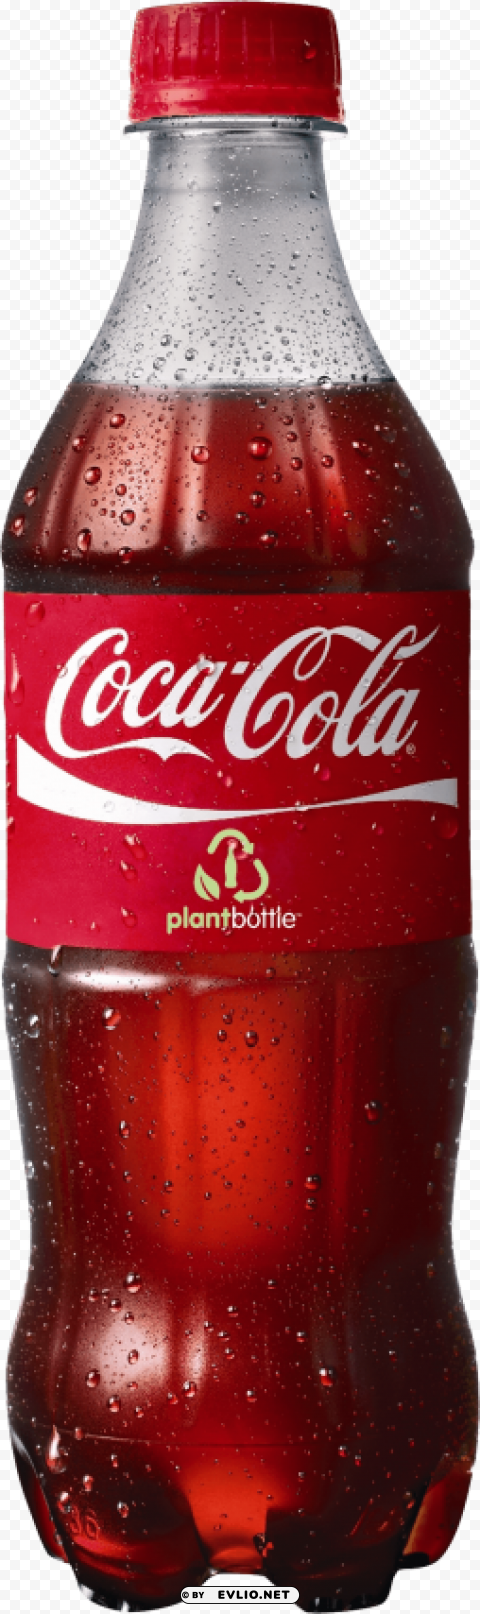 coca cola bottle Isolated Artwork in HighResolution Transparent PNG